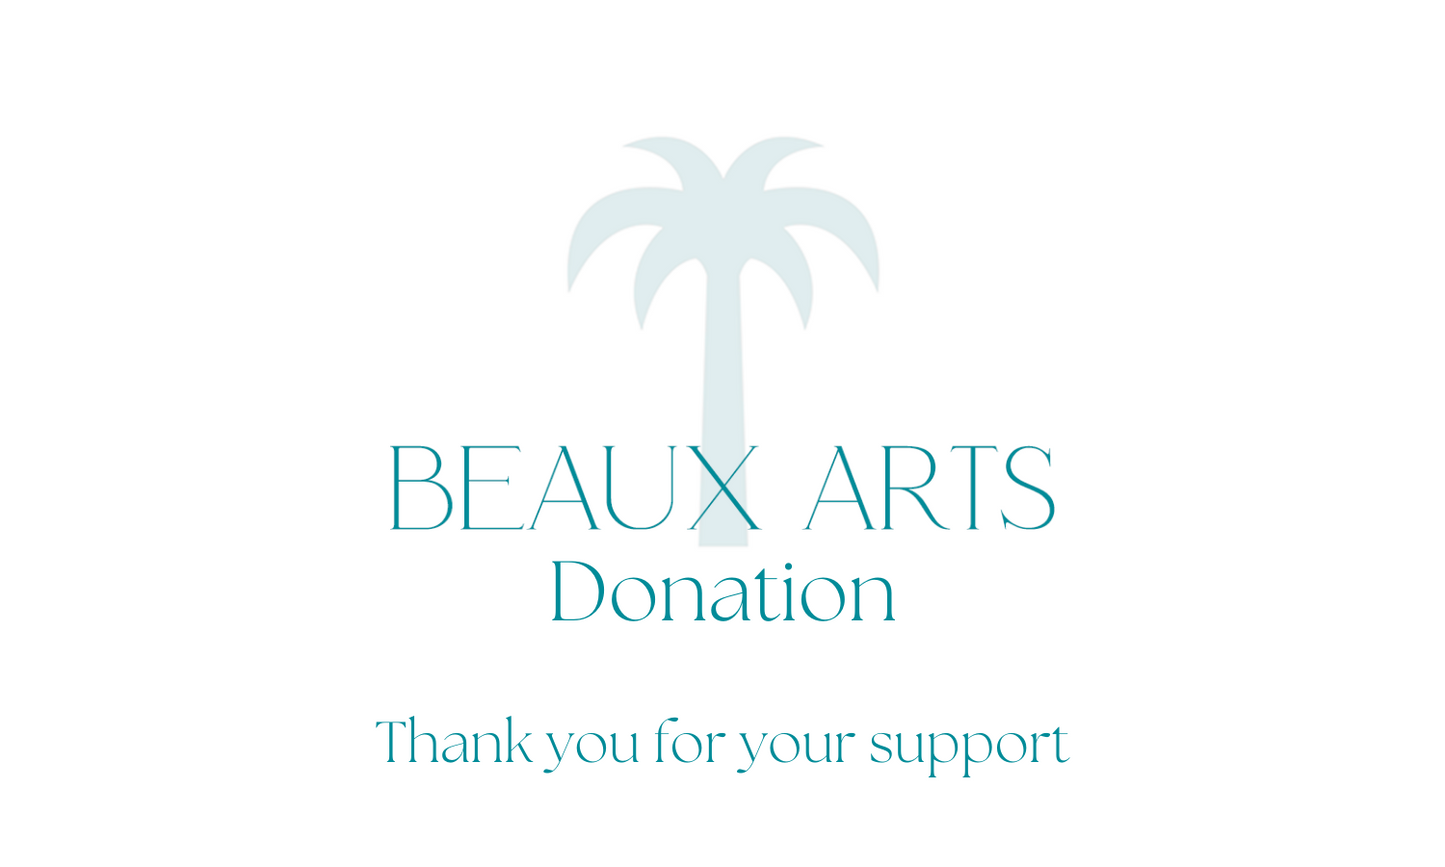 Donation to Beaux Arts